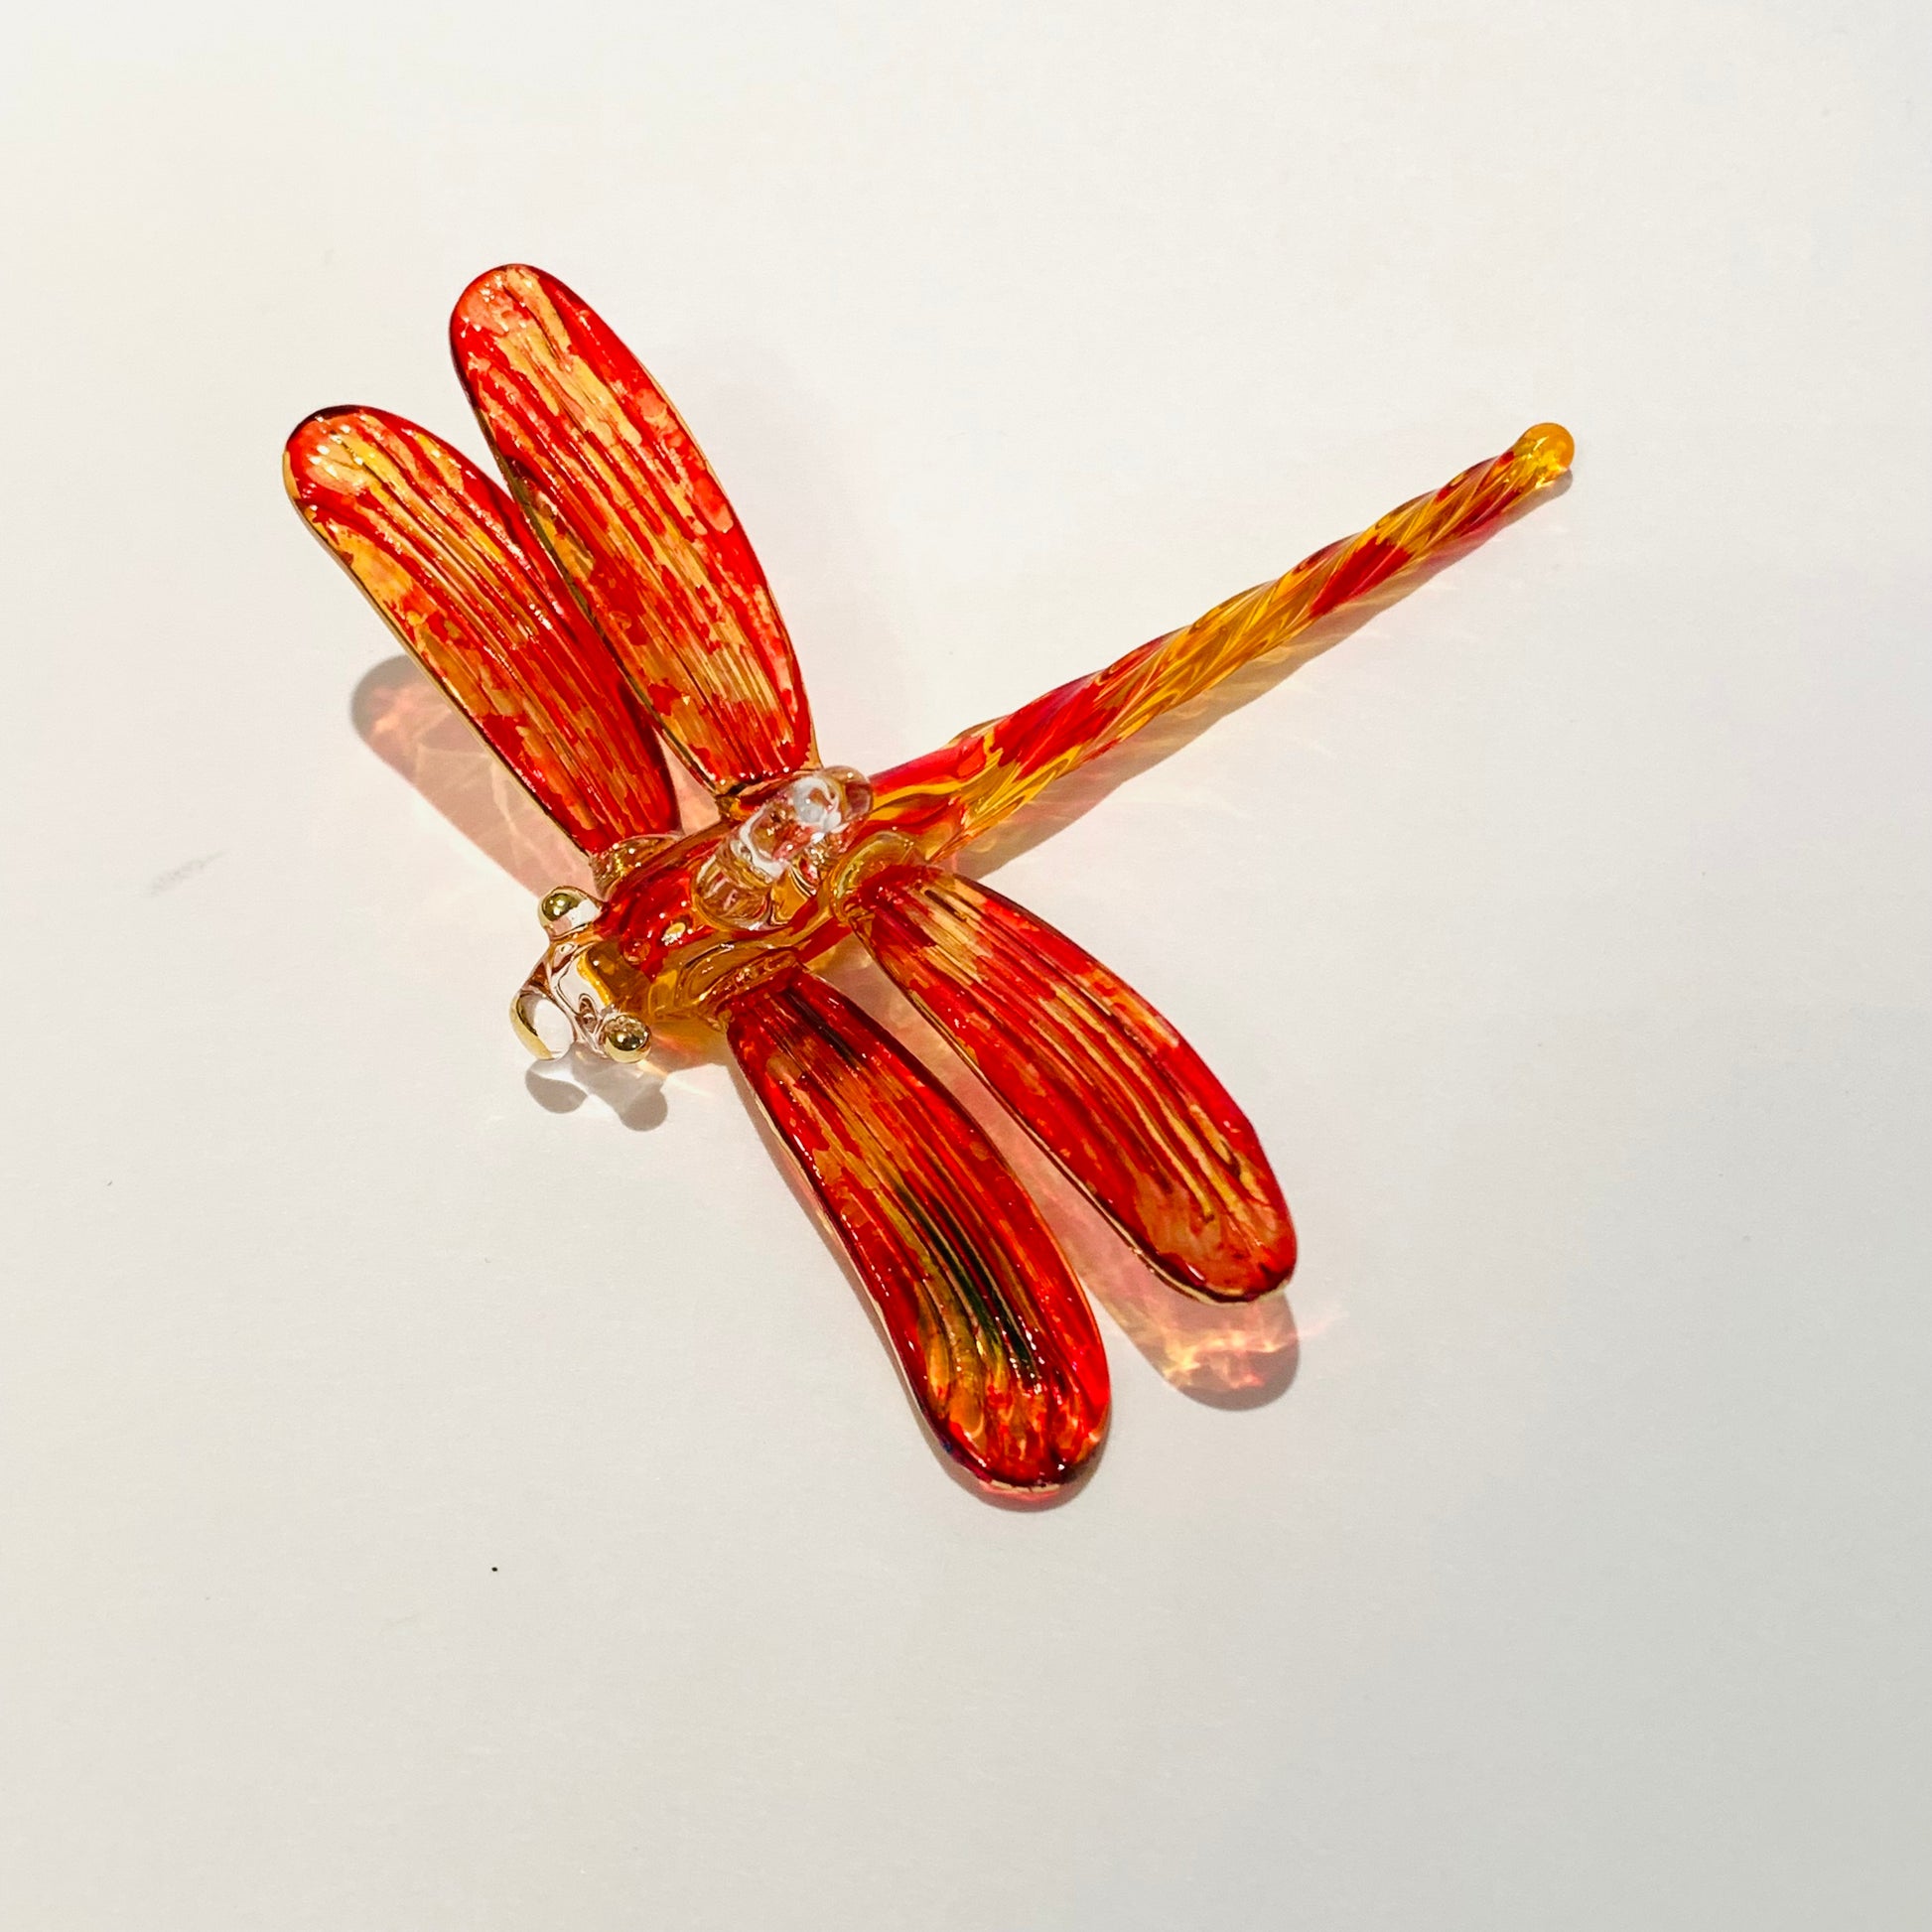 Blown Glass Ornament - Dragonfly Yellow & Red Variegated